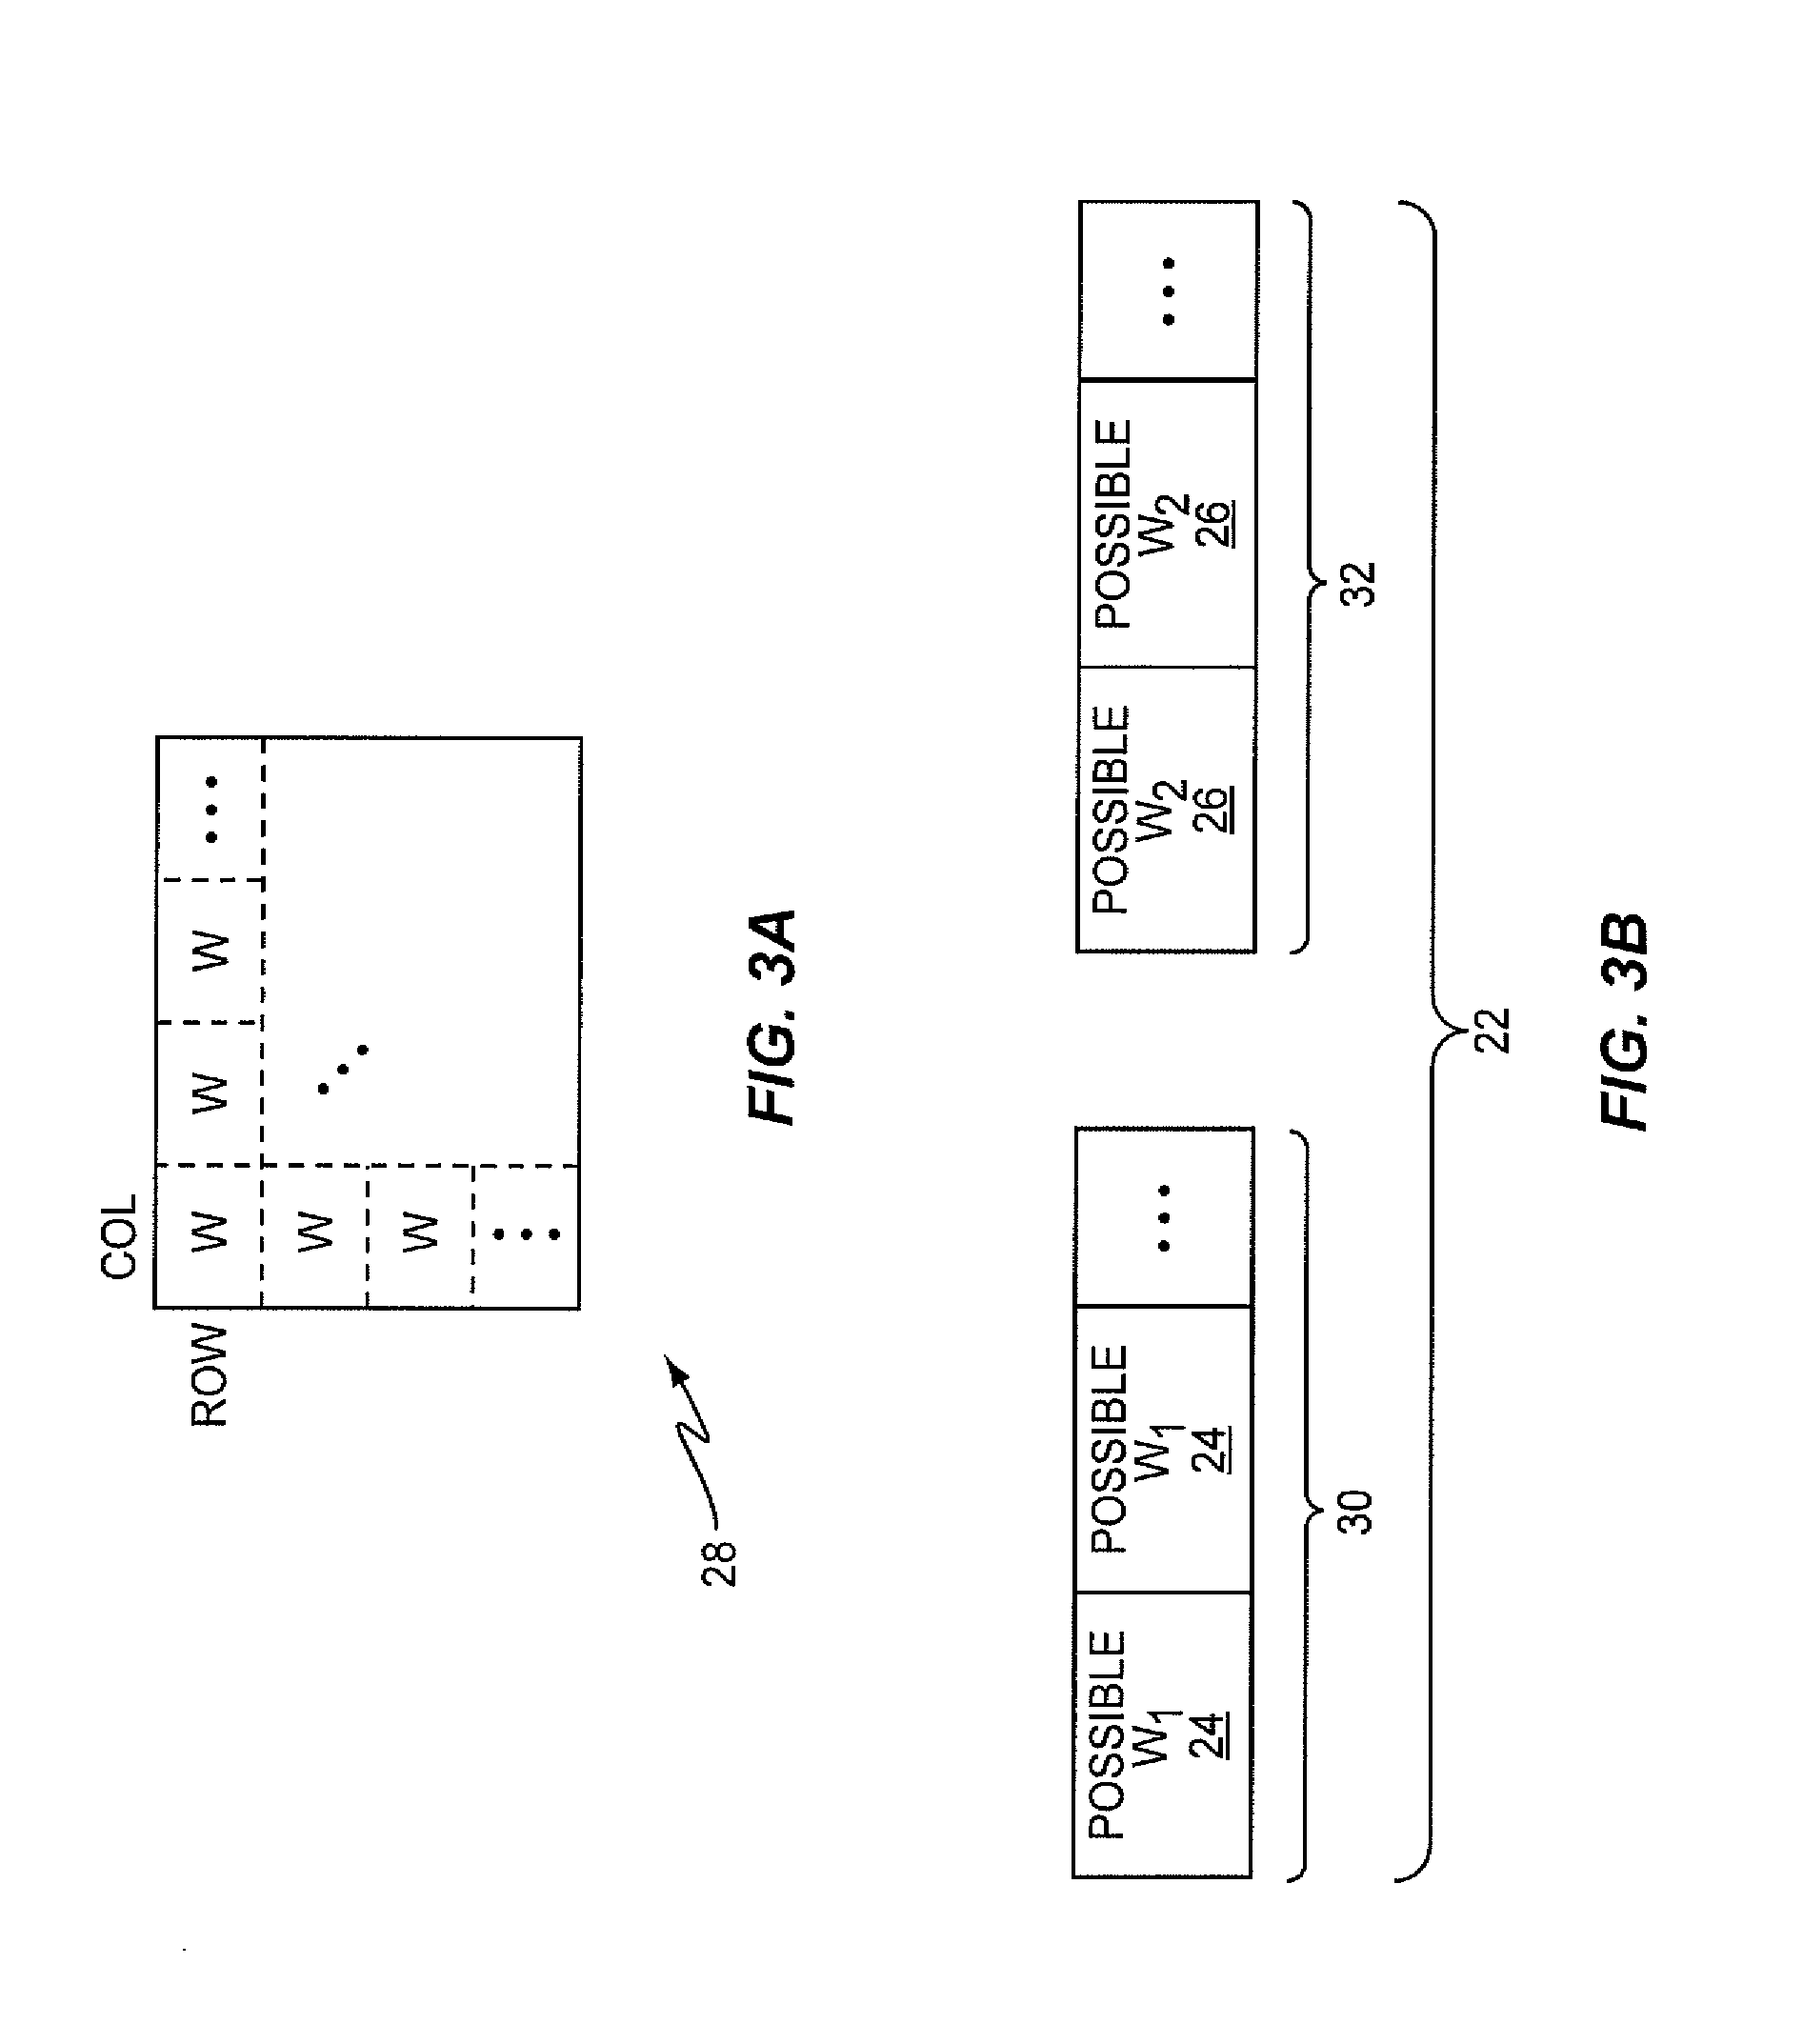 Method and apparatus for using factorized precoding